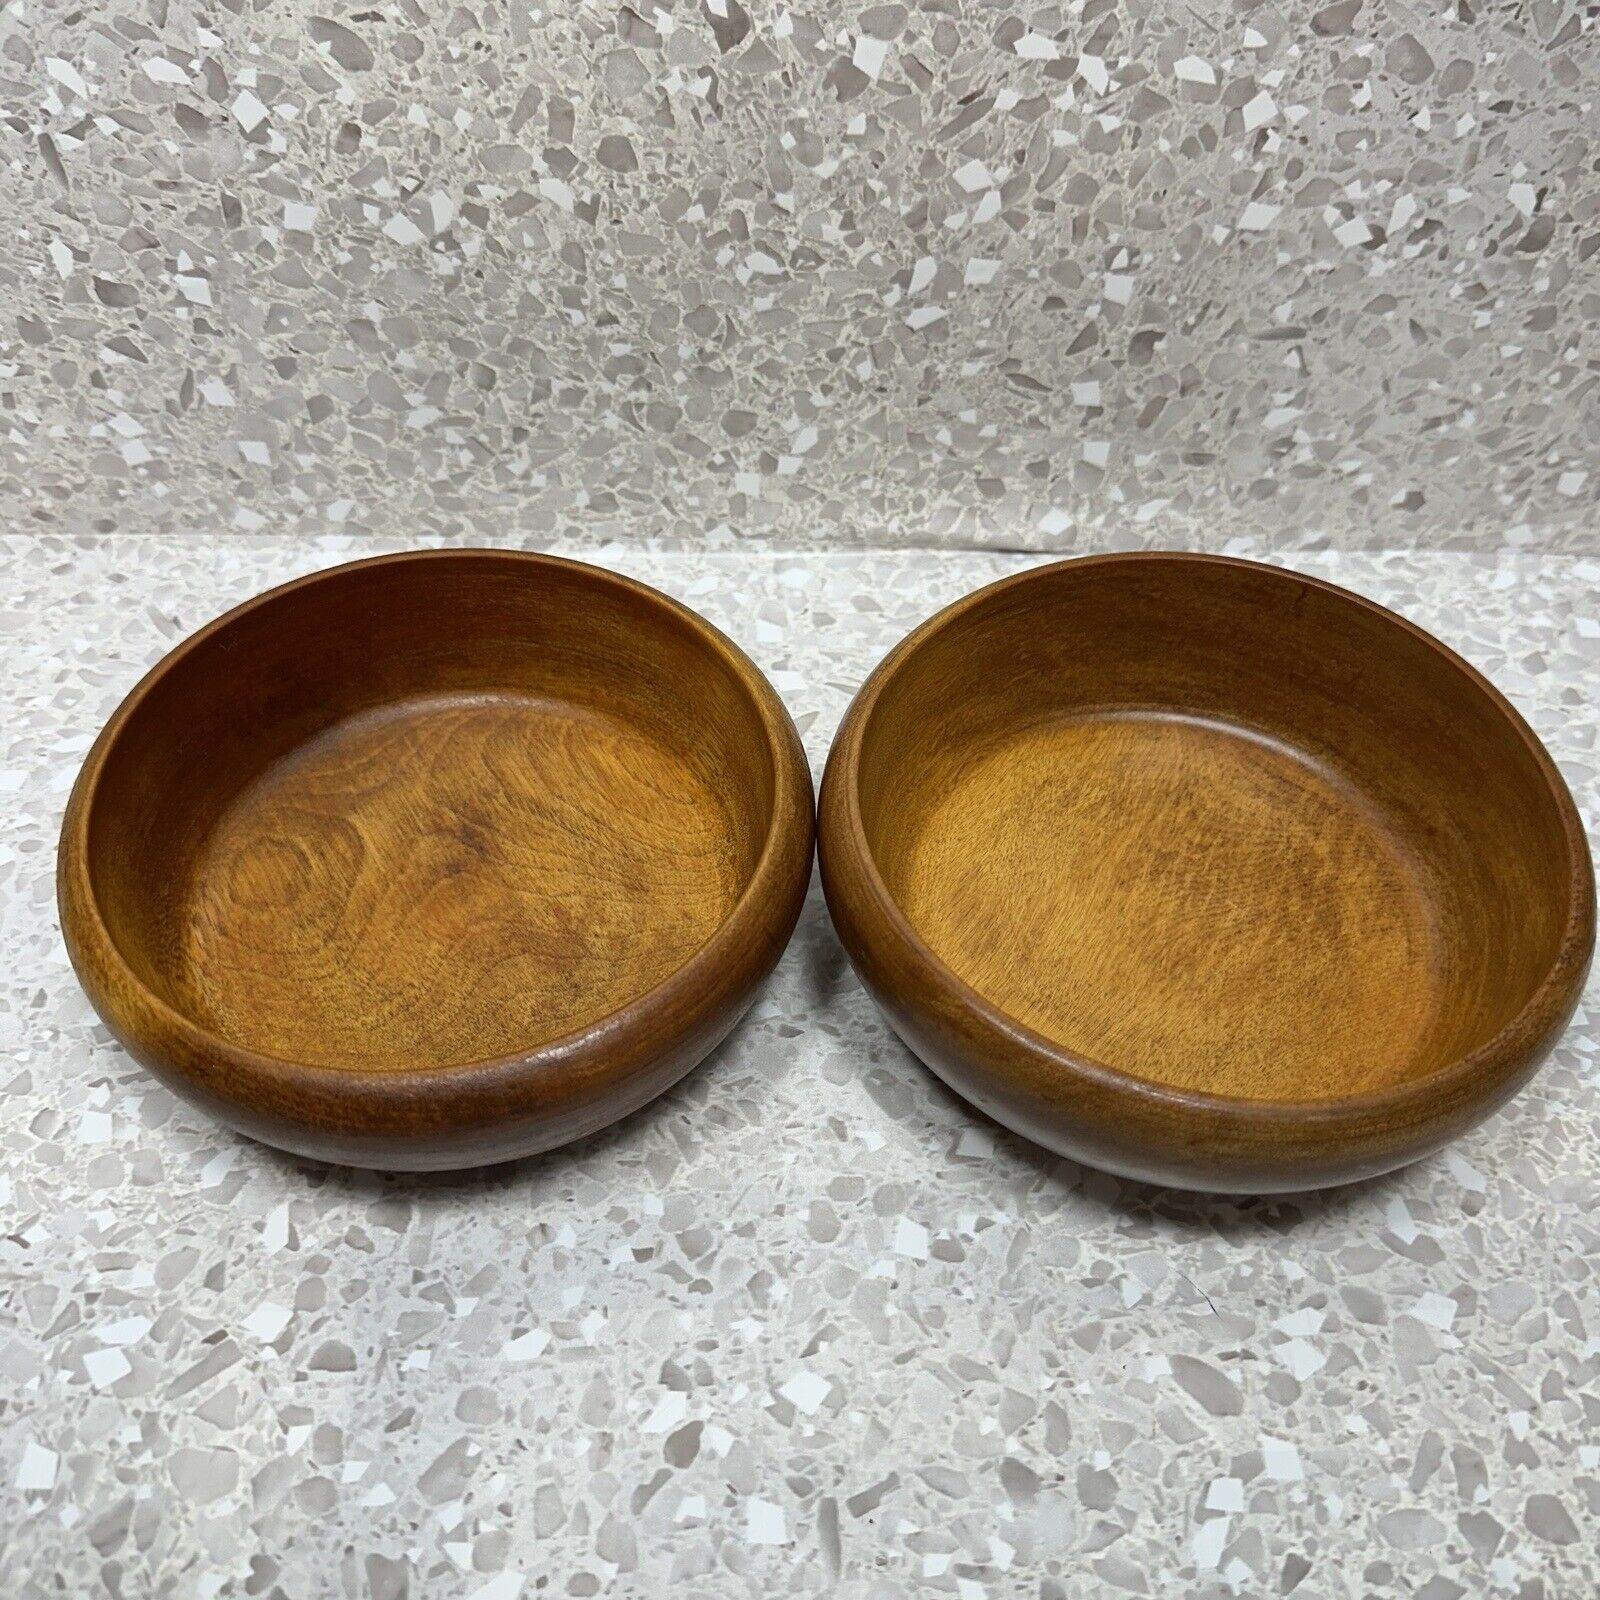 Vintage Wooden Bowls Rustic Farmhouse Set of 2 Snack Candy Appetizer Round